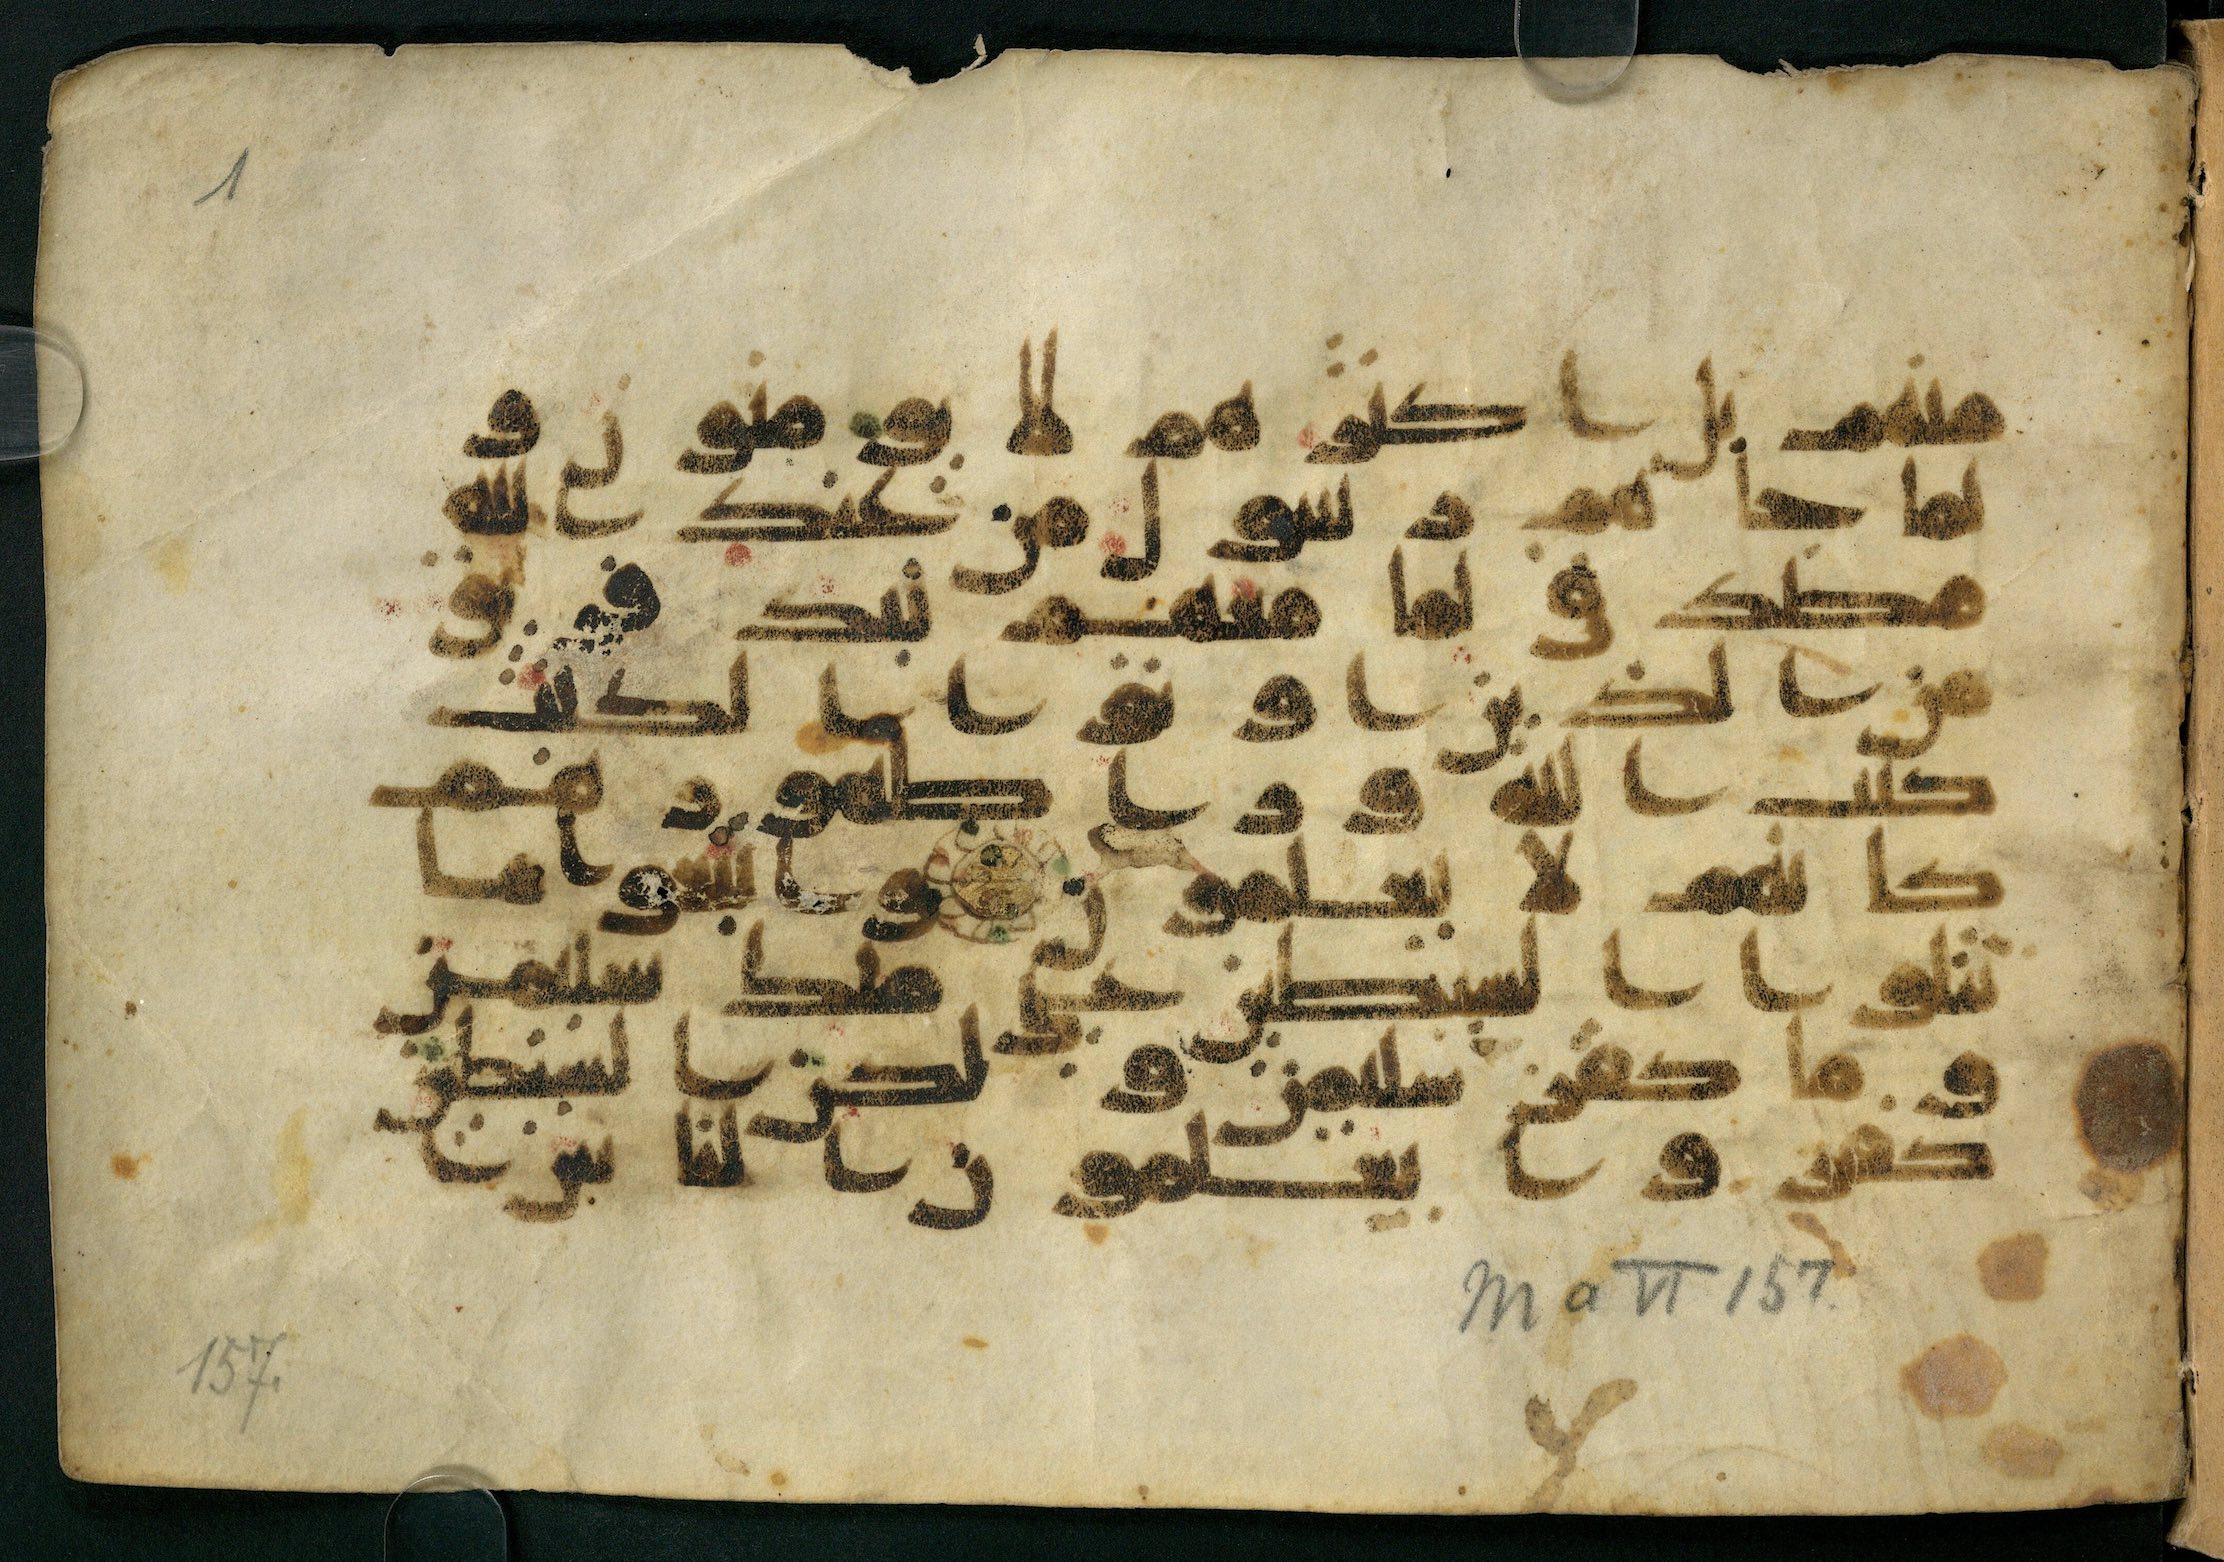 A page from the Kufic parchments